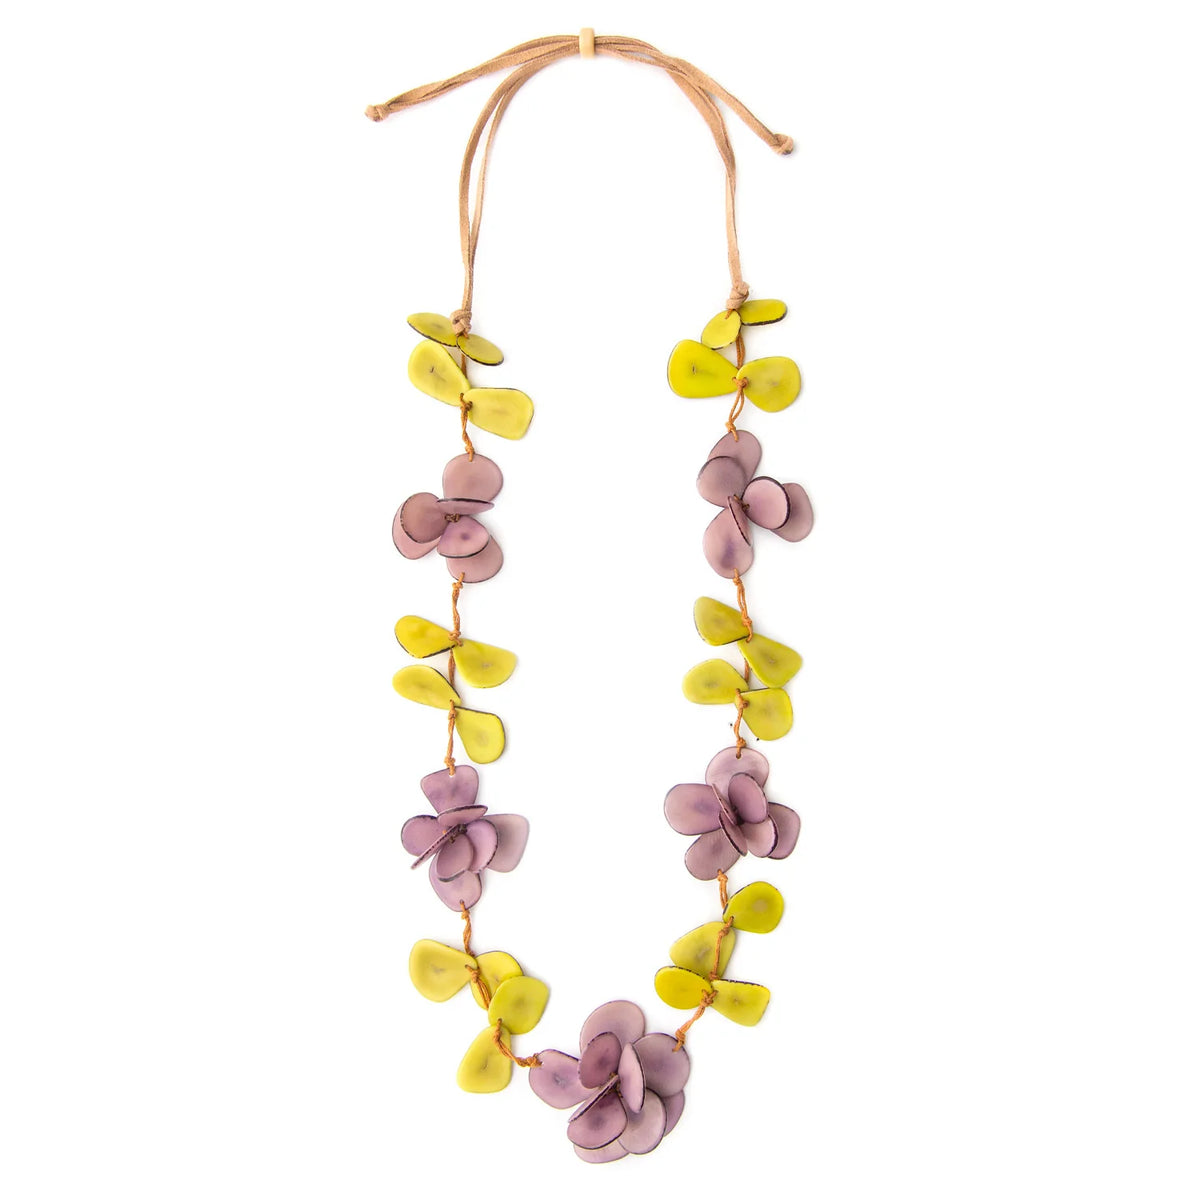 Tagua Rosie Necklace